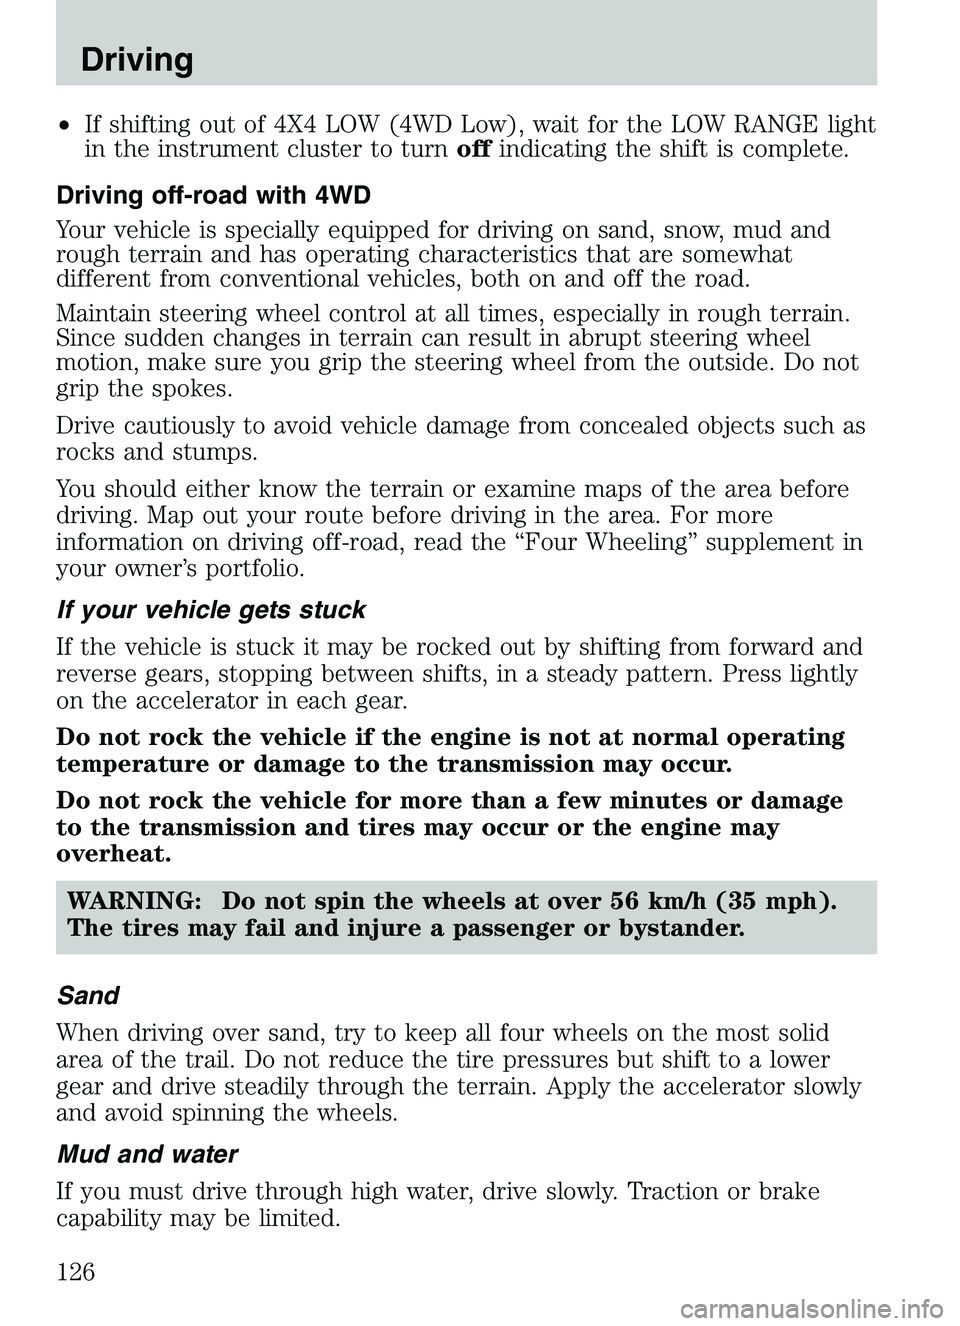 MAZDA MODEL B4000 4WD 2003  Owners Manual •If shifting out of 4X4 LOW (4WD Low), wait for the LOW RANGE light
in the instrument cluster to turn offindicating the shift is complete.
Driving off-road with 4WD
Your vehicle is specially equippe